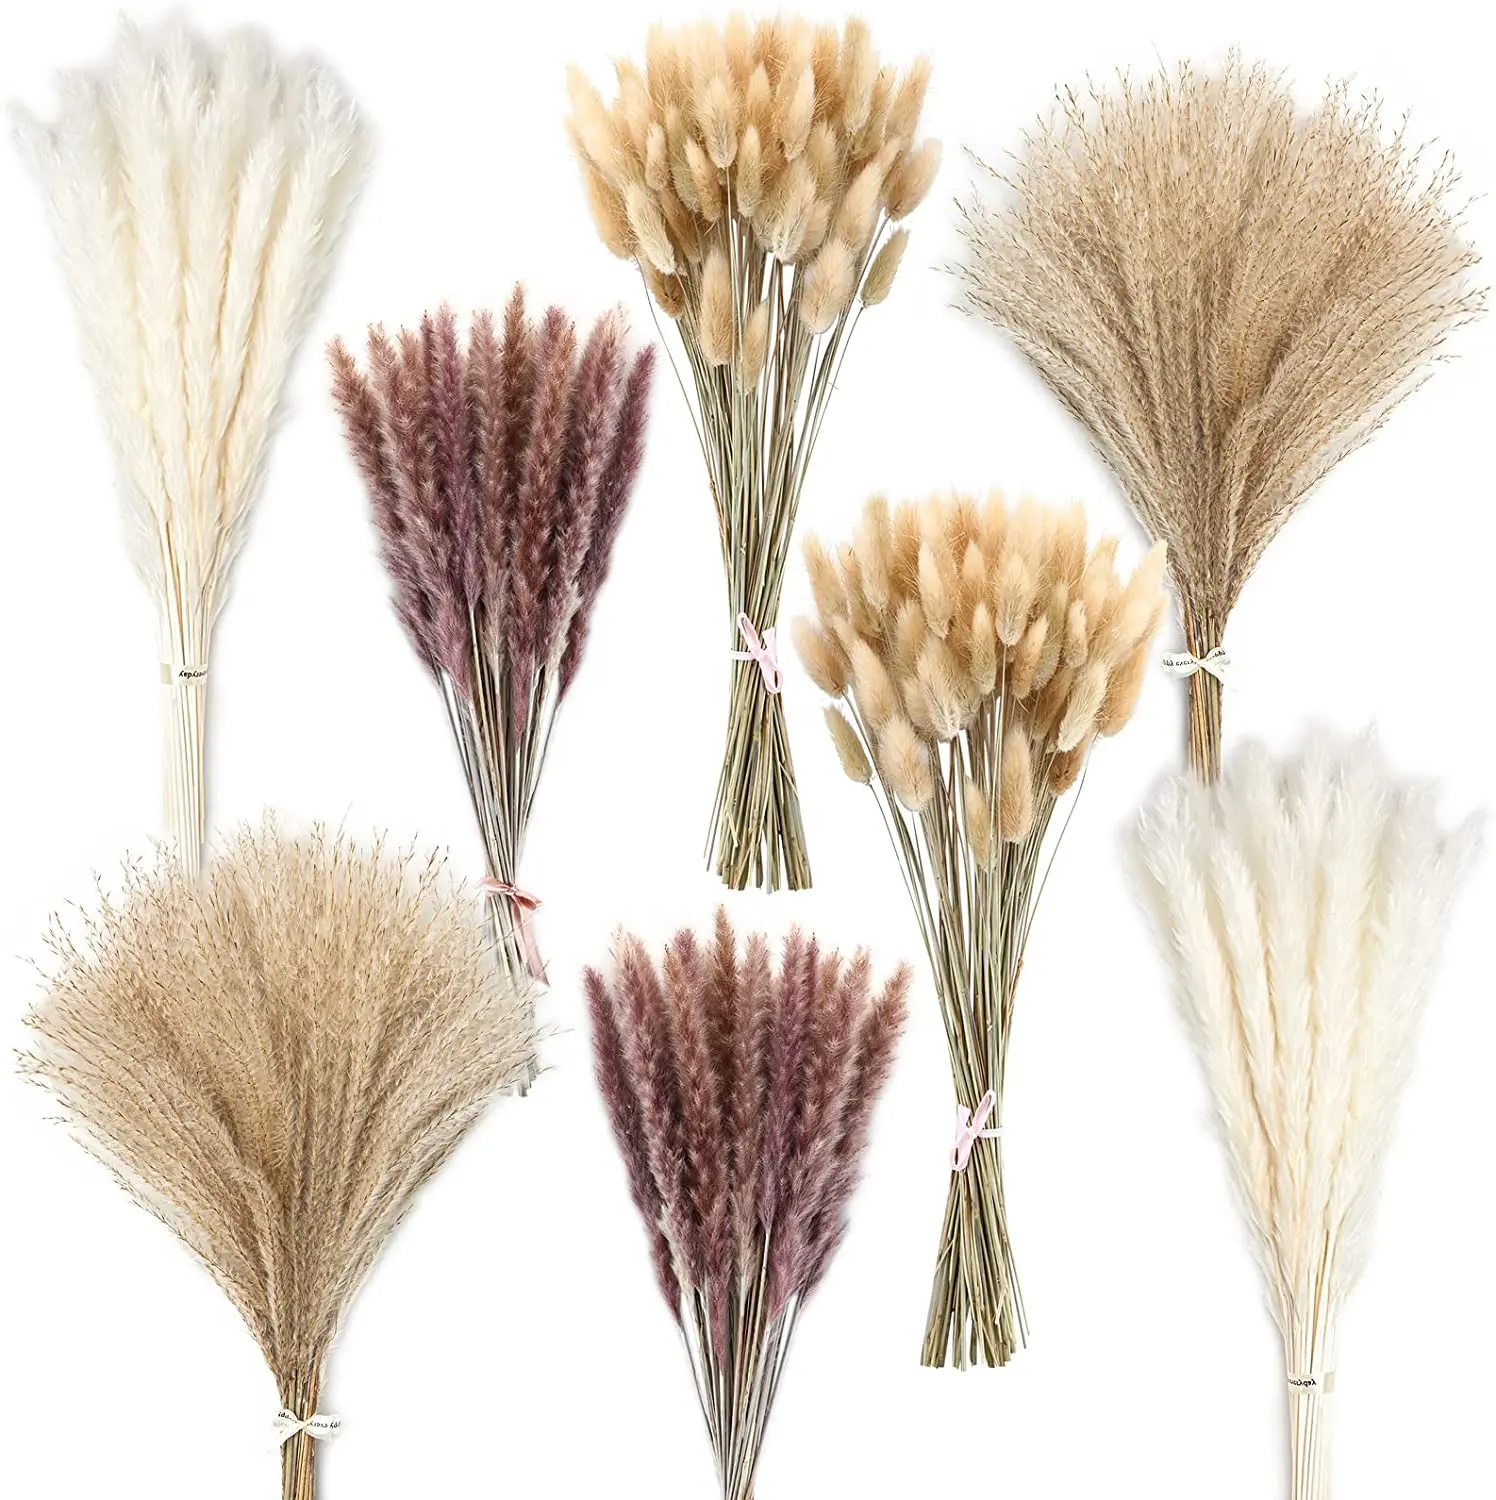 P-02 Wholesale Boho Wedding Decor Large Plume Dry Pampas Grass Flower Decor Natural Real Preserved Dried Pampas Grass For Amazon